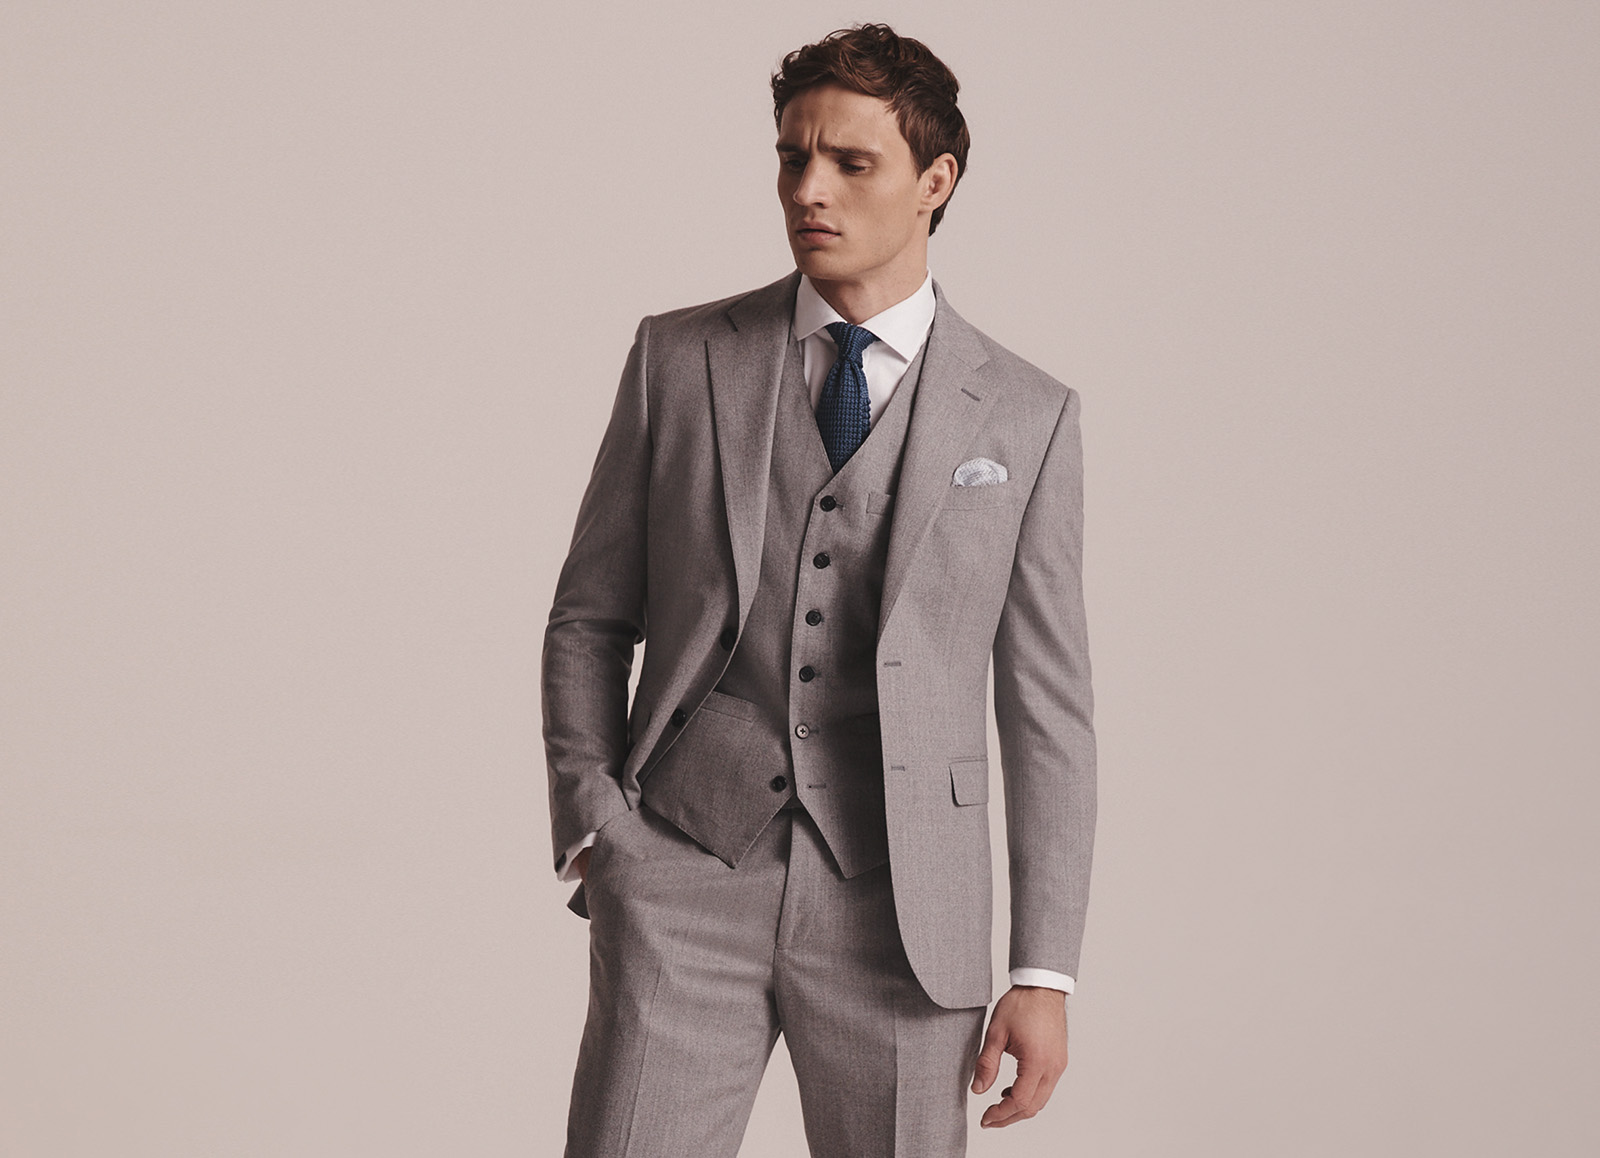 Cad & The Dandy - Style Guide - Mixing Bespoke Suits & Separates